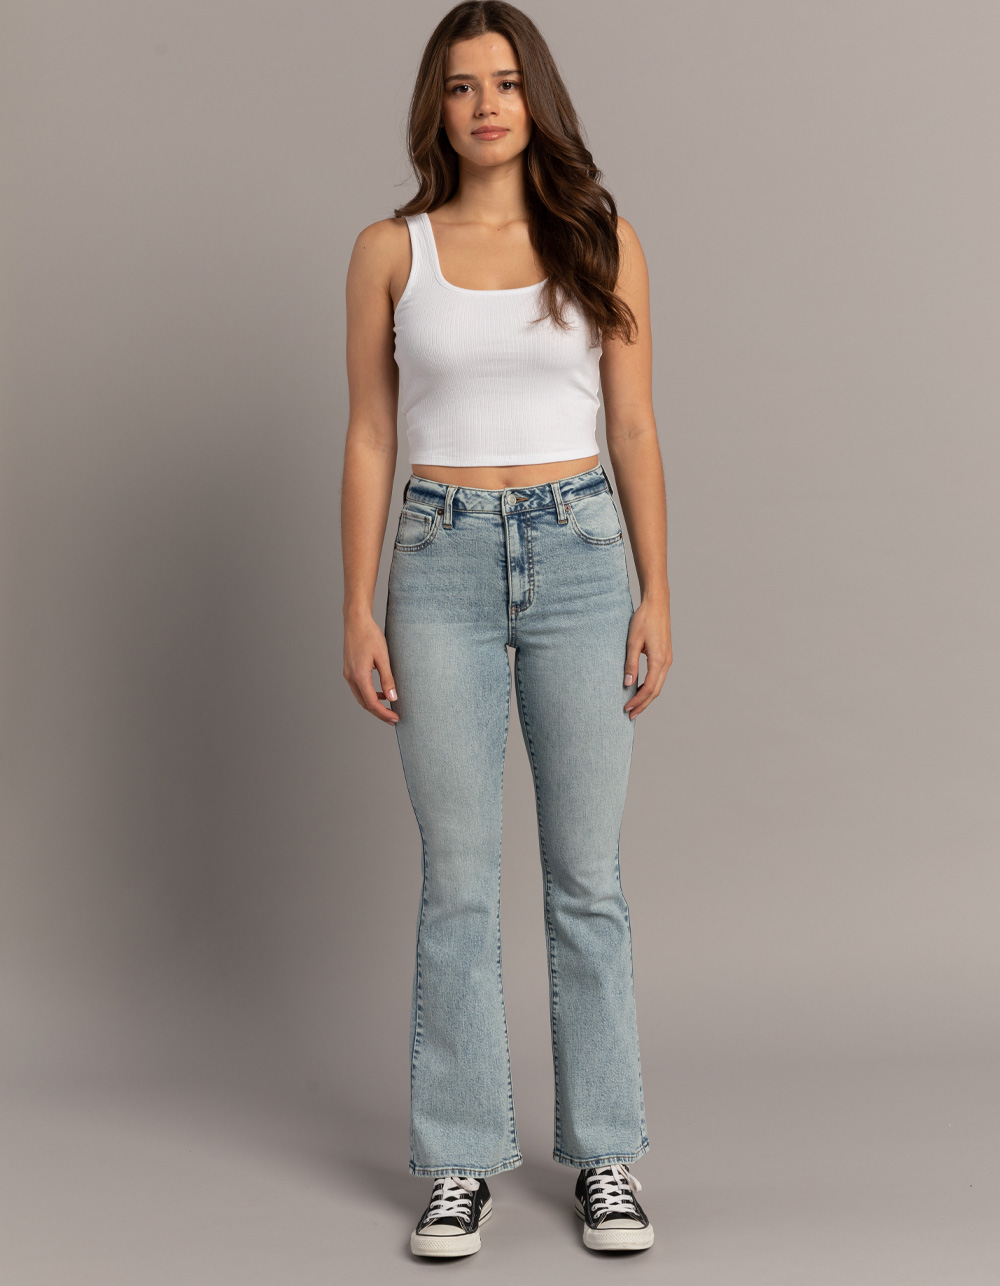 RSQ Womens High Rise Flare Jeans - LIGHT WASH, Tillys